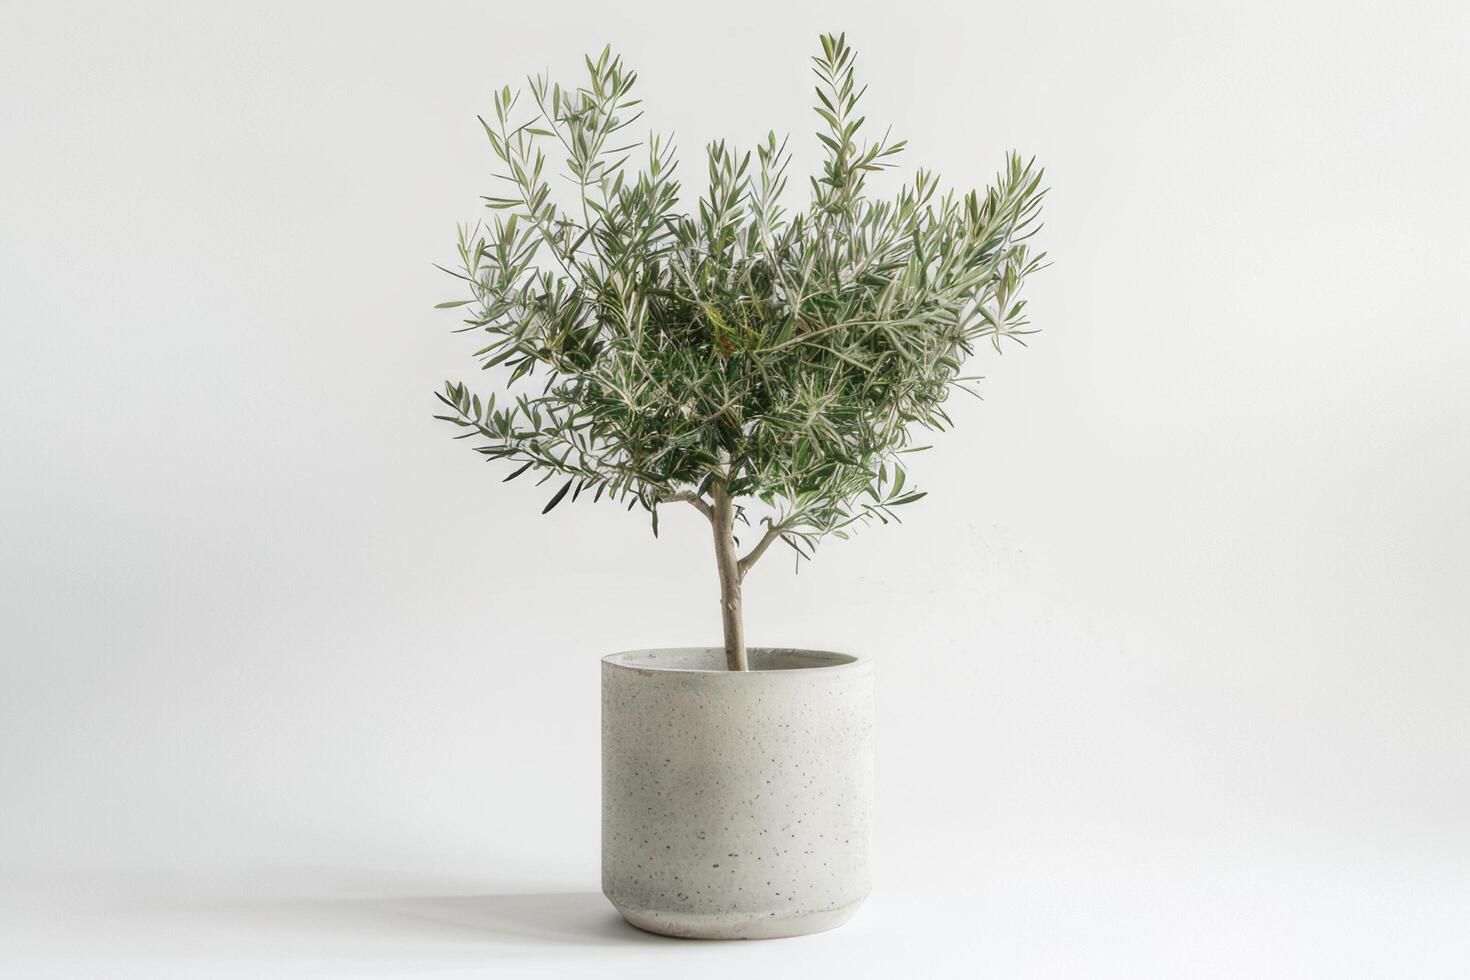 Tall, slender olive trees planted in stylish concrete pots. photo